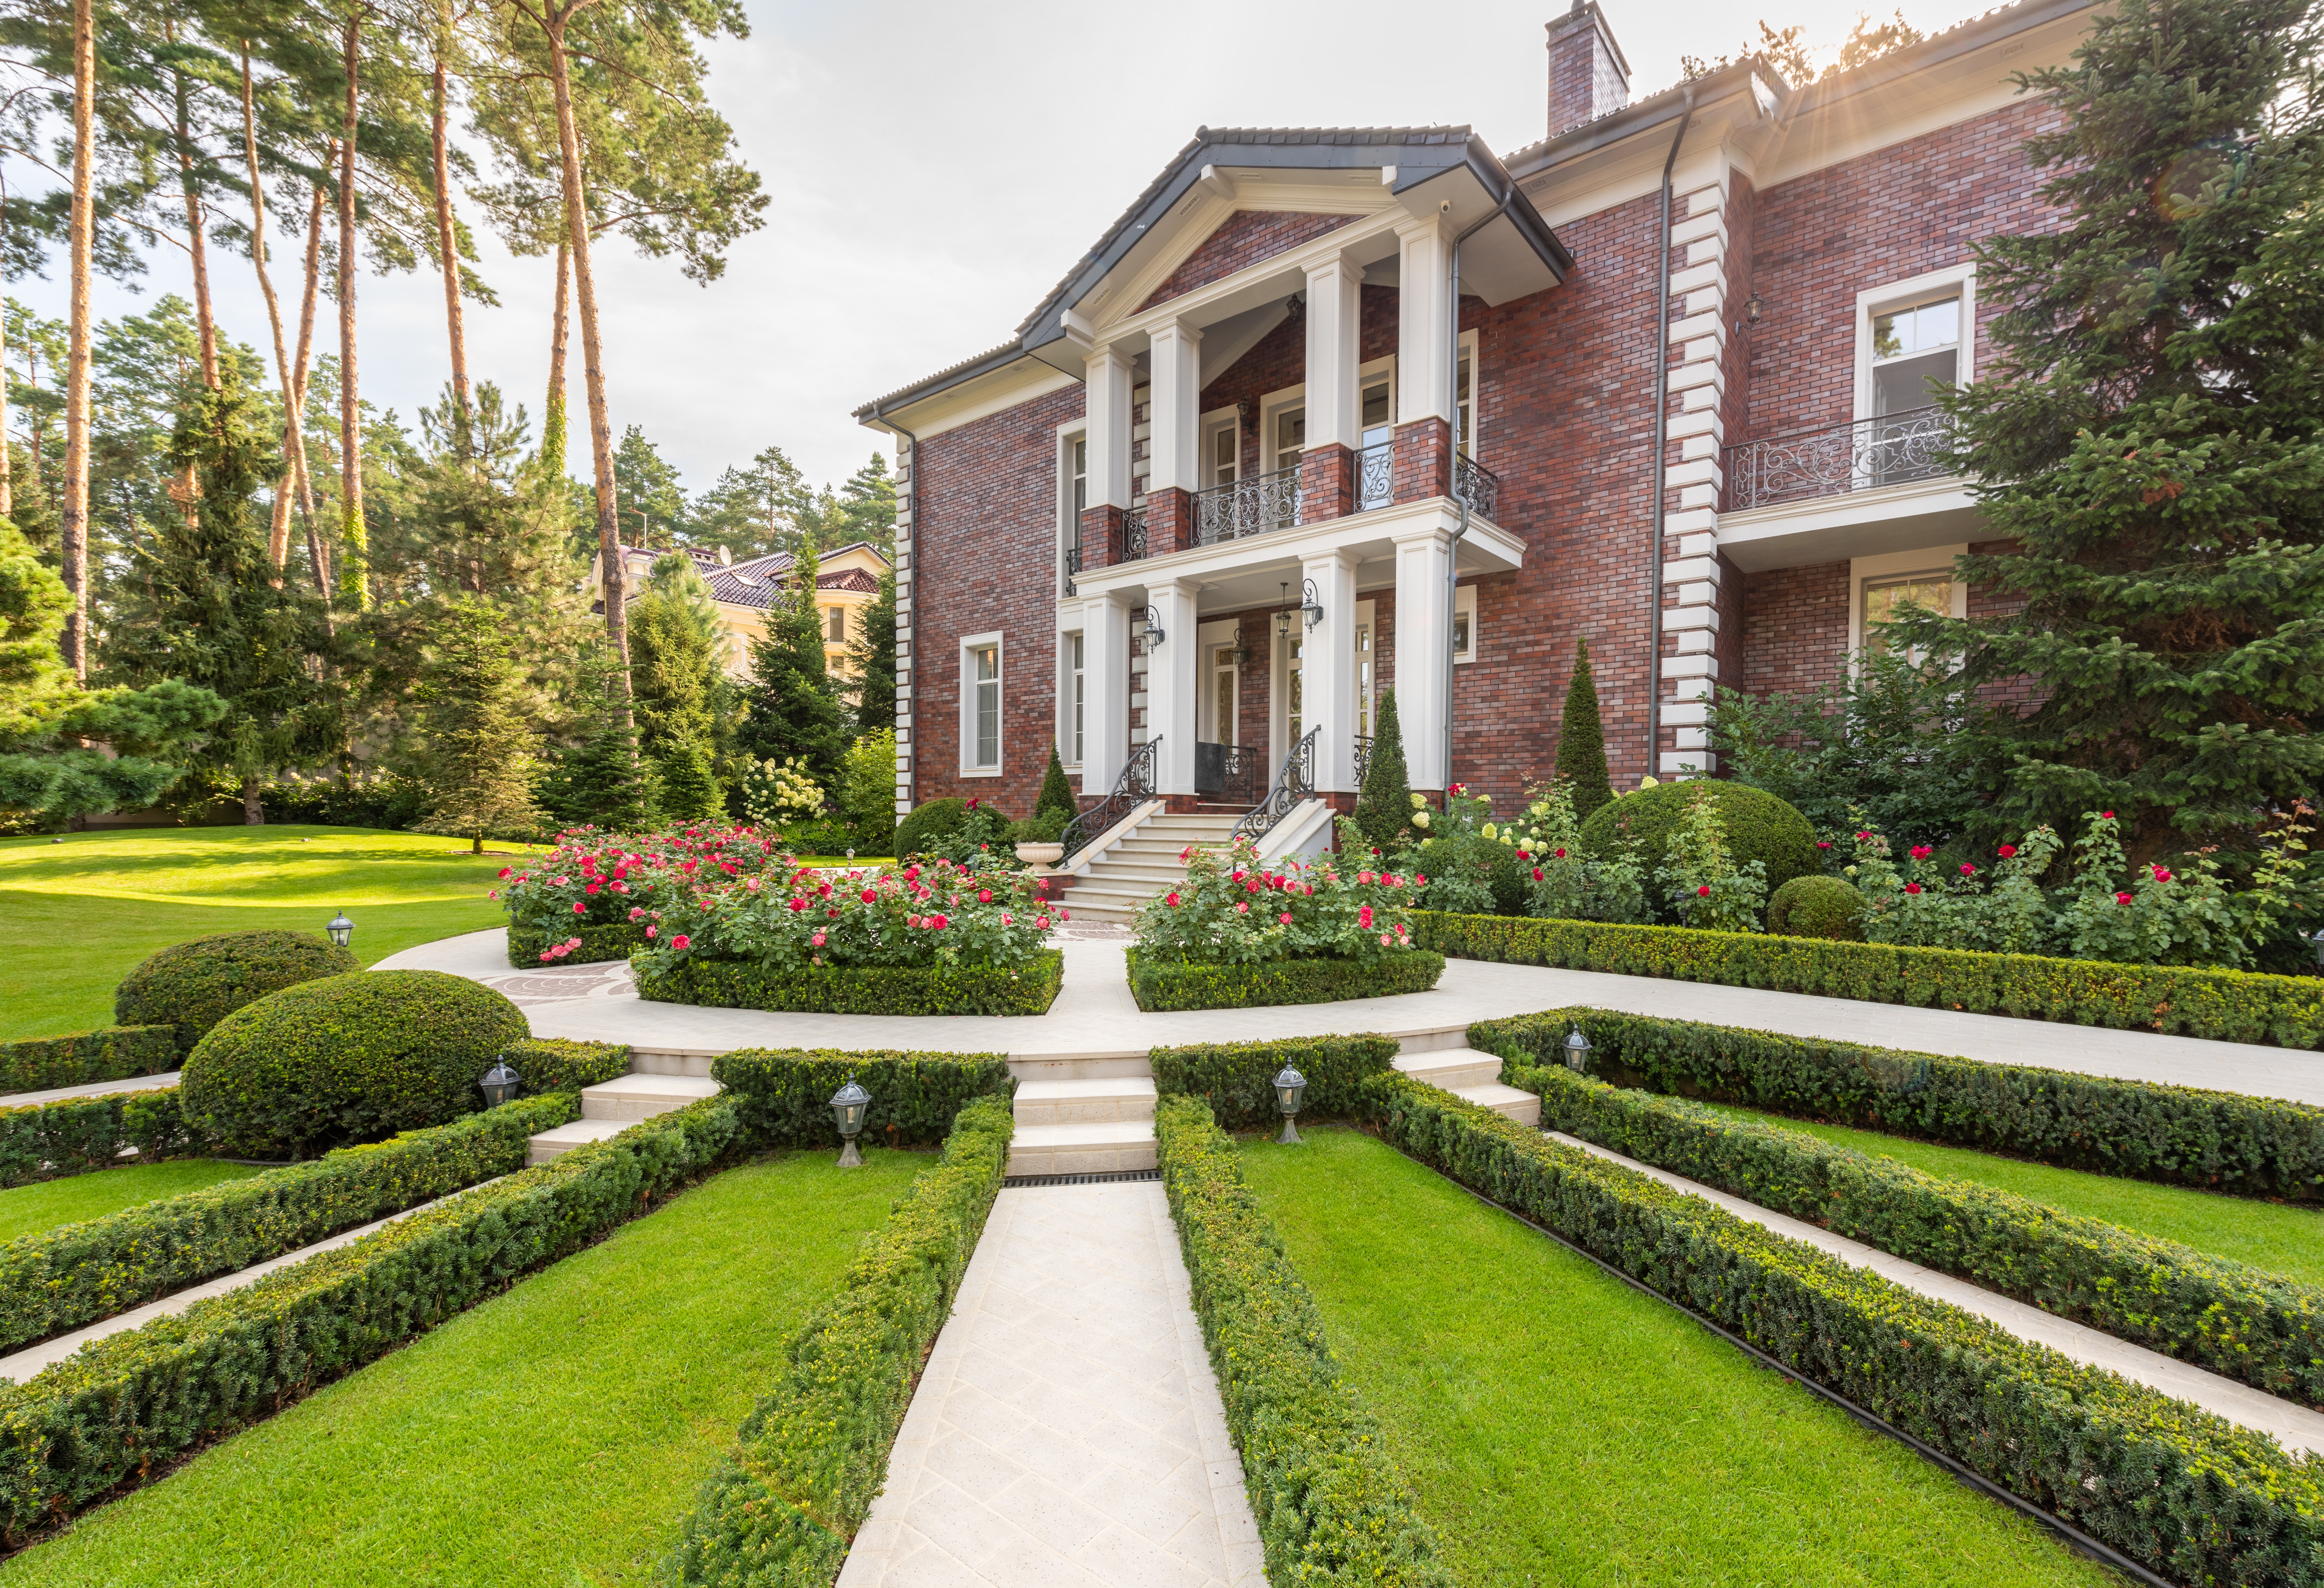 Large classic home with white pillars and landscaped front yard with flowers and hedge trimming services